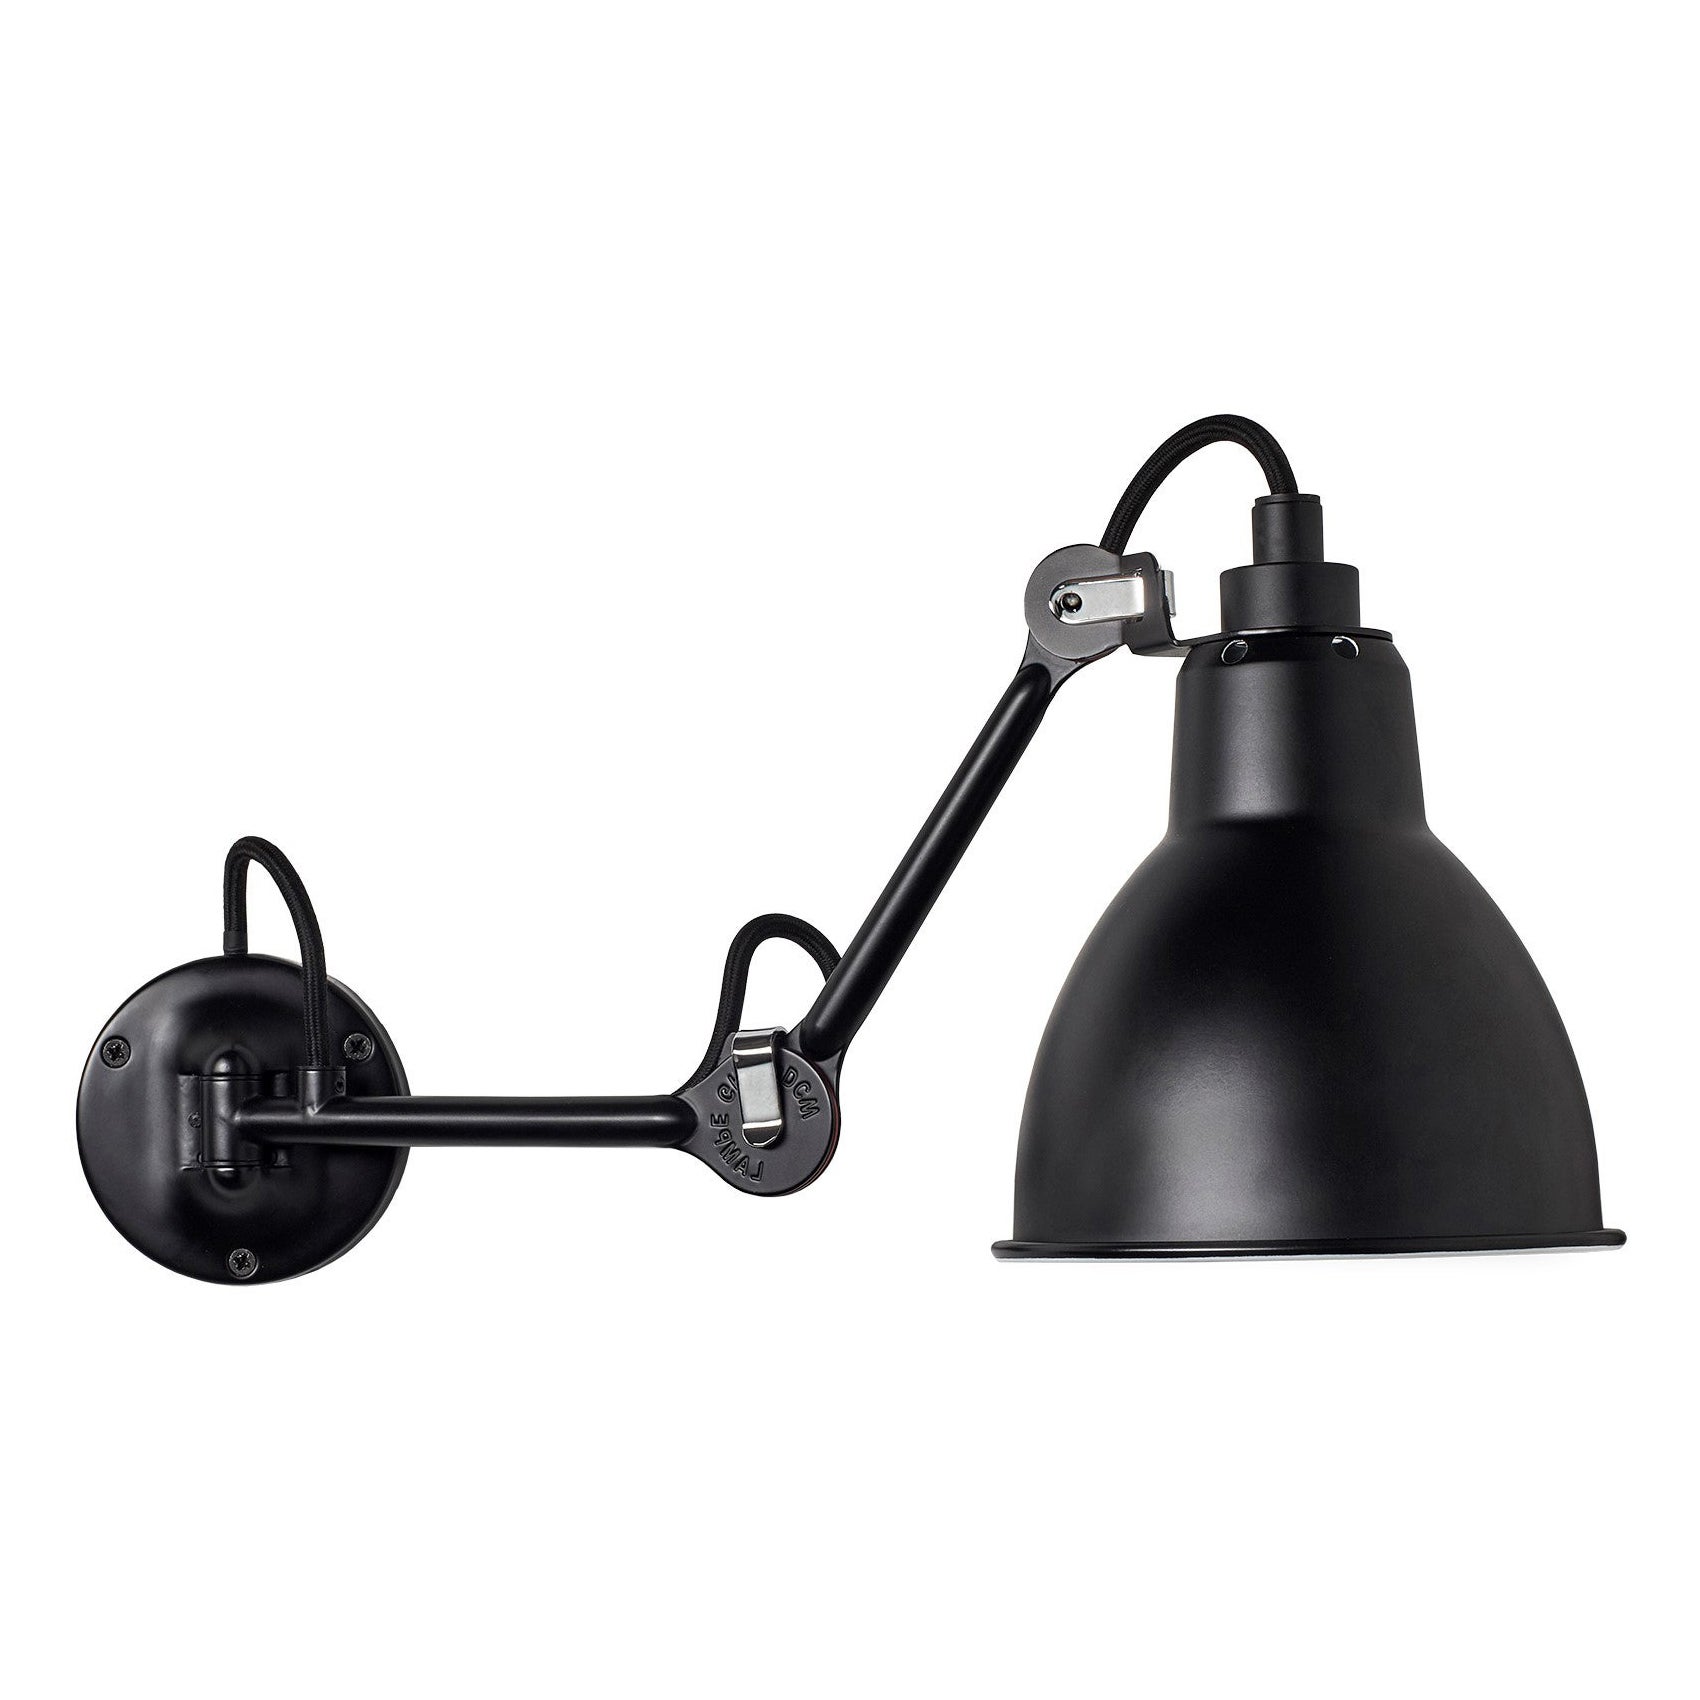 DCW Editions La Lampe Gras N°204 Wall Lamp in Black Steel Arm and Black Shade For Sale